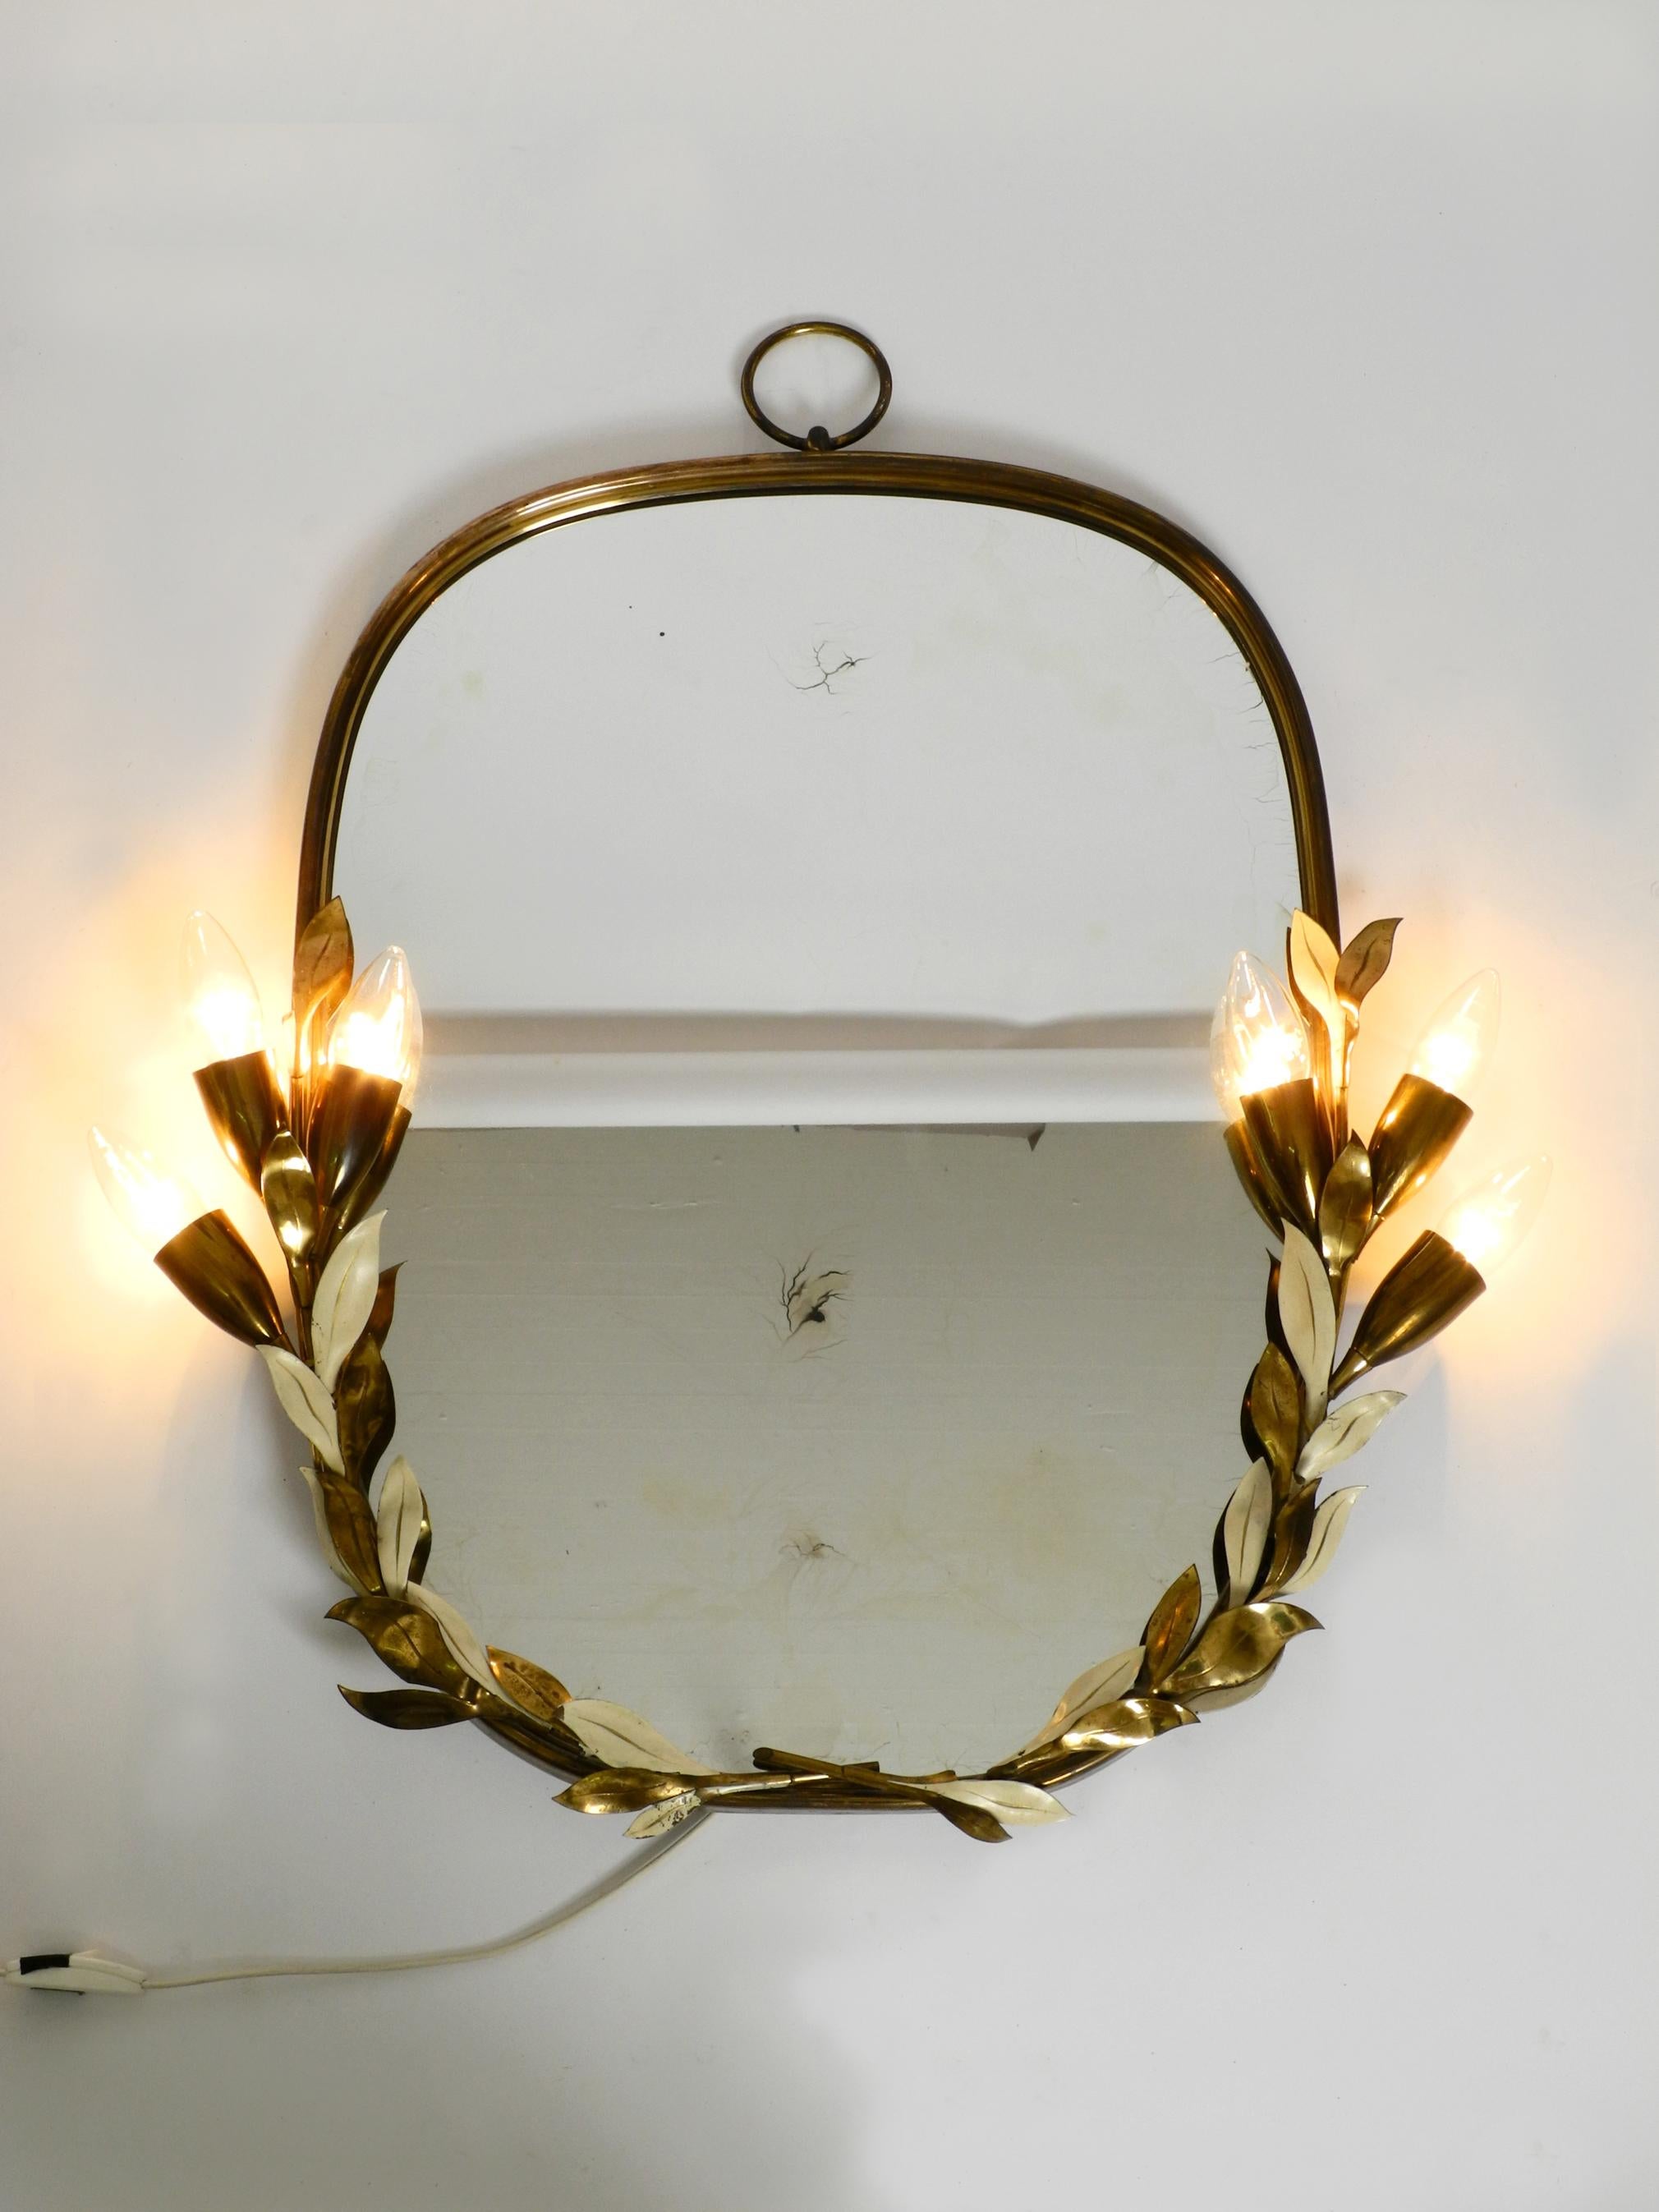 Extraordinary large, heavy floral brass light mirror.
Manufactured by Vereinigte Werkstätten. Made in Germany.
Very rare version with floral design, with many details.
The complete frame is made of pure brass, some leaves are highlighted and